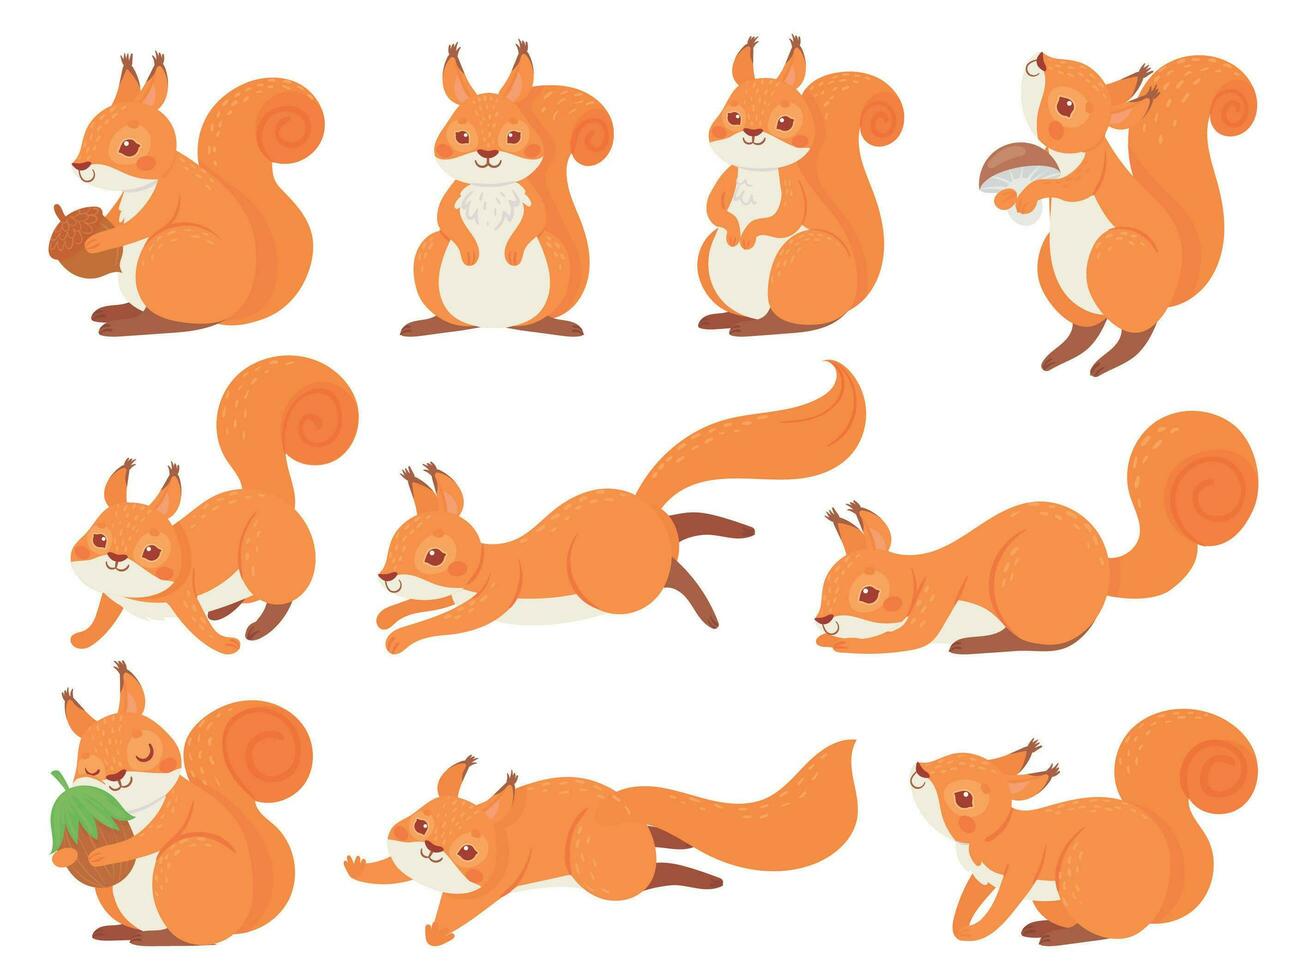 Cartoon squirrel. Cute squirrels with red furry tail, mammals animals and brown fur squirrel vector set. Adorable forest fauna, funny wildlife stickers collection. Playful cub illustrations pack